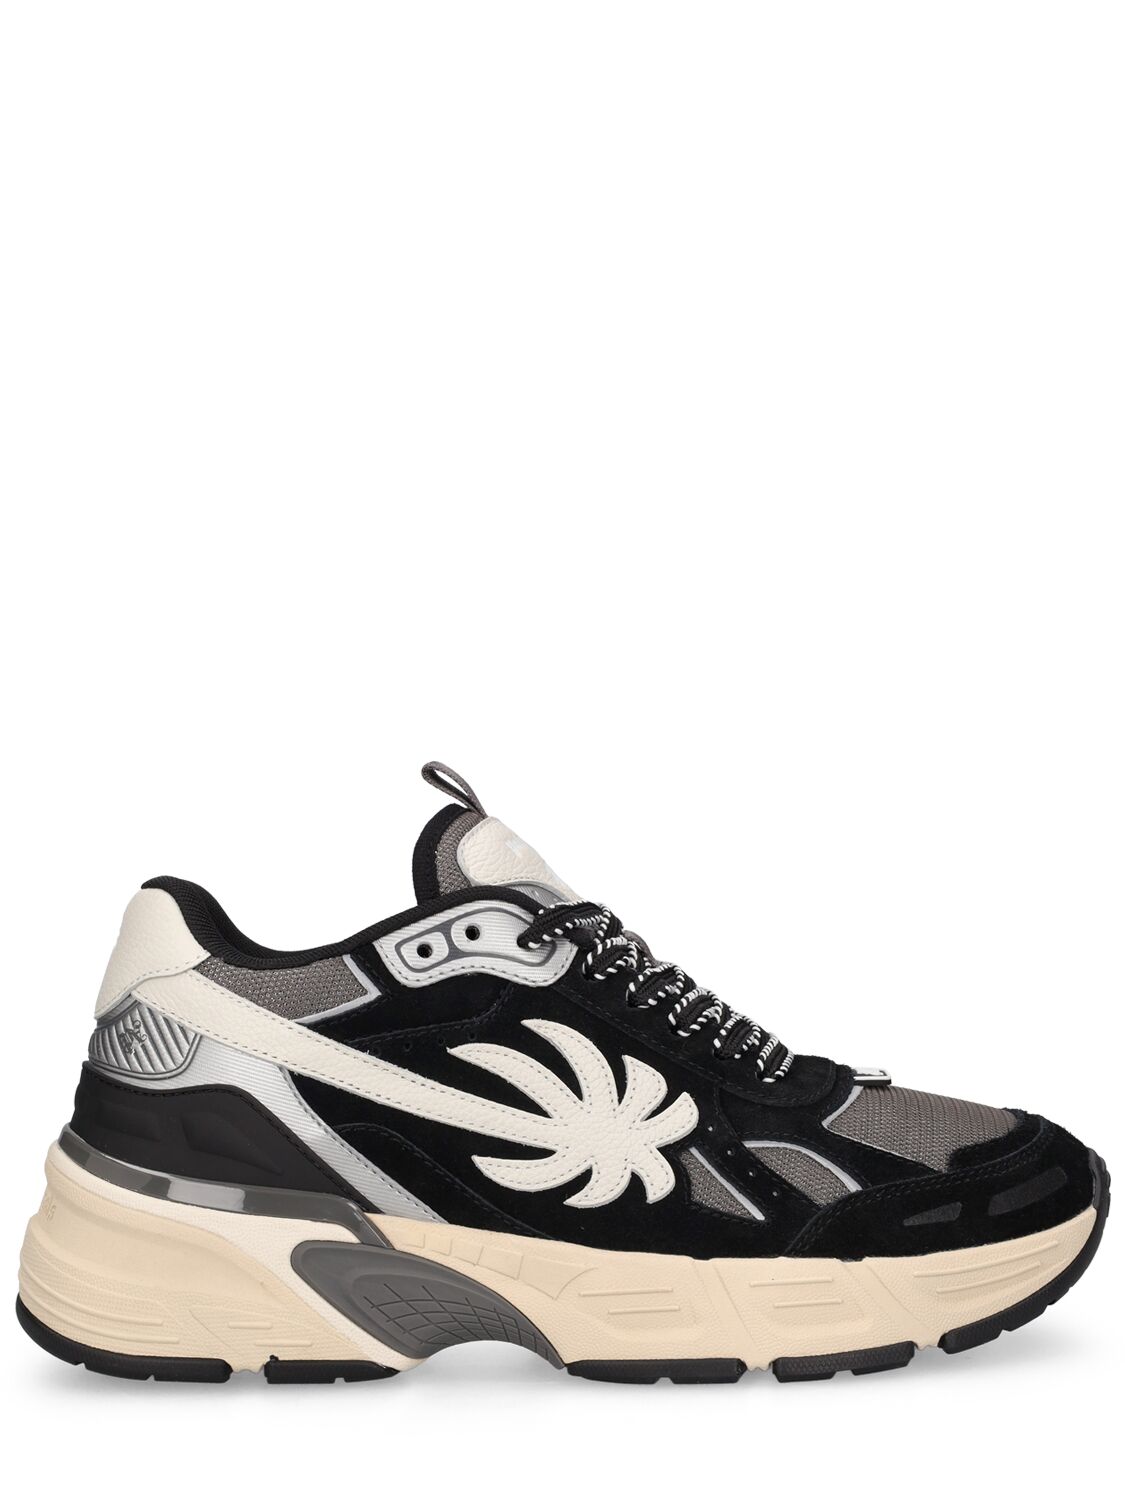 The Palm Runner Leather Sneakers